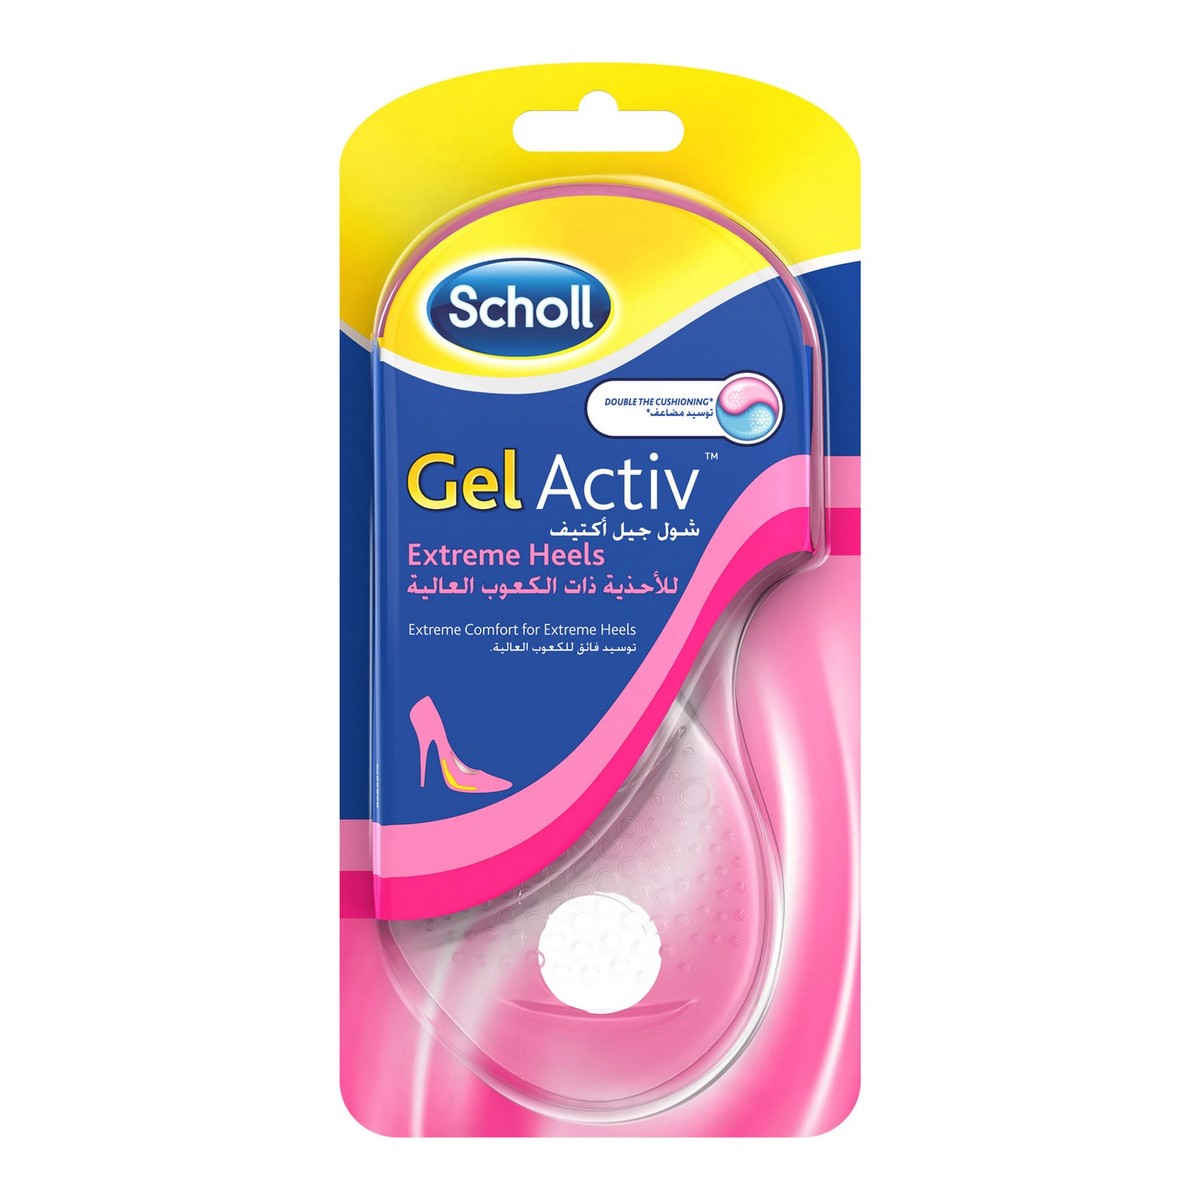 Scholl Gel Activ for Extreme Heels Insoles 1 pair